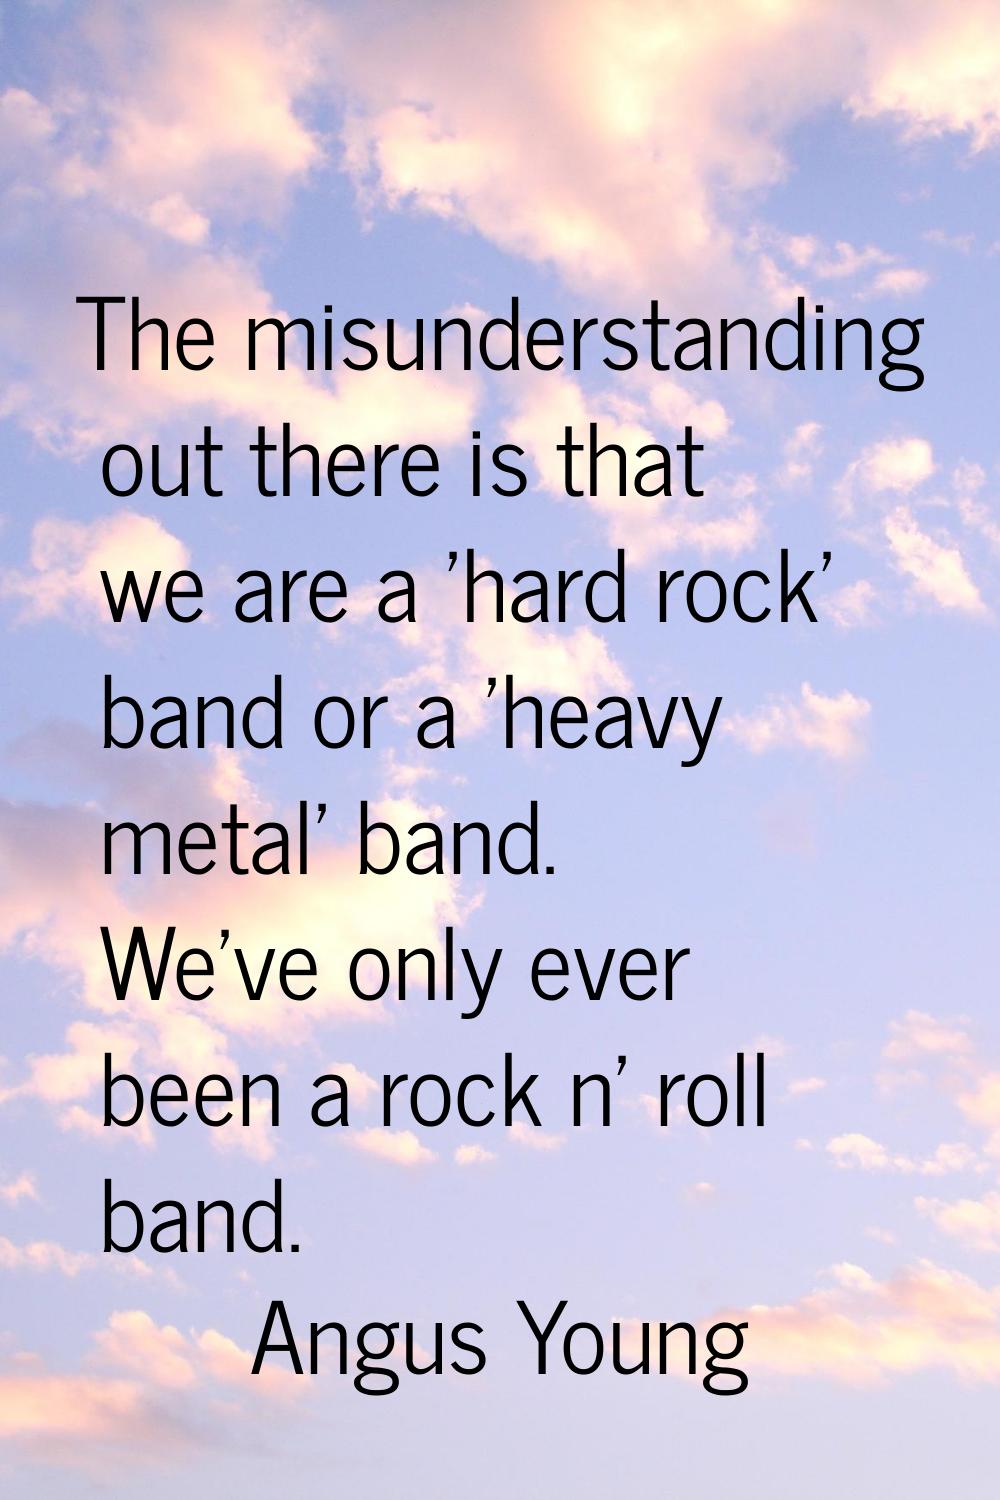 The misunderstanding out there is that we are a 'hard rock' band or a 'heavy metal' band. We've onl